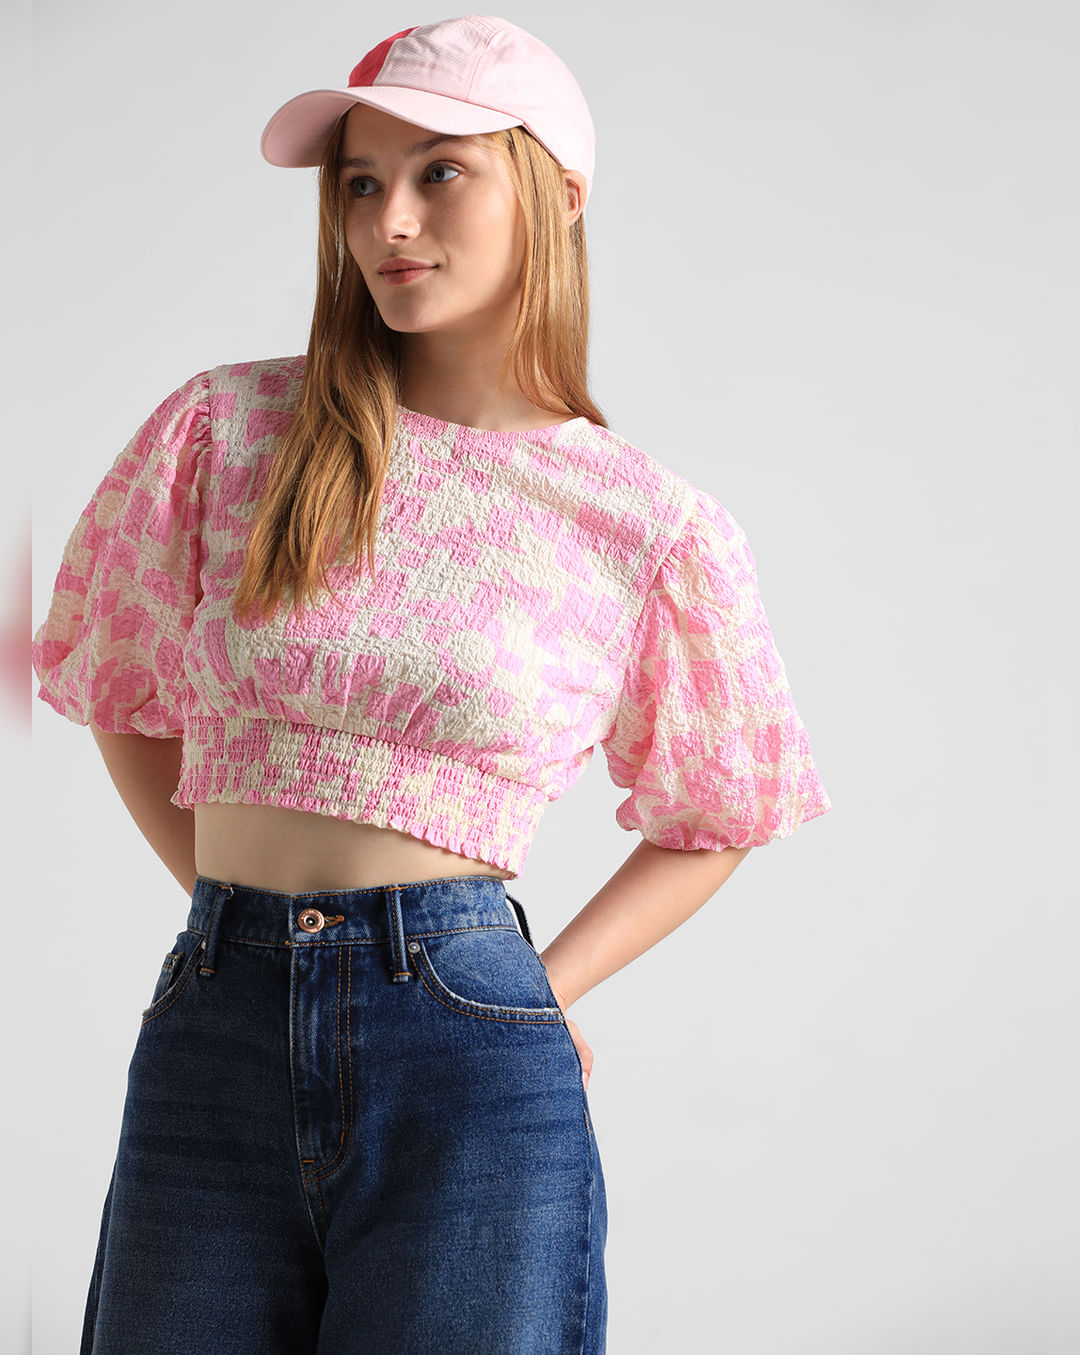 Tender Touch Blush Pink Long Sleeve Crop Top  Pink long sleeve crop top, Long  sleeve crop top, Crop tops